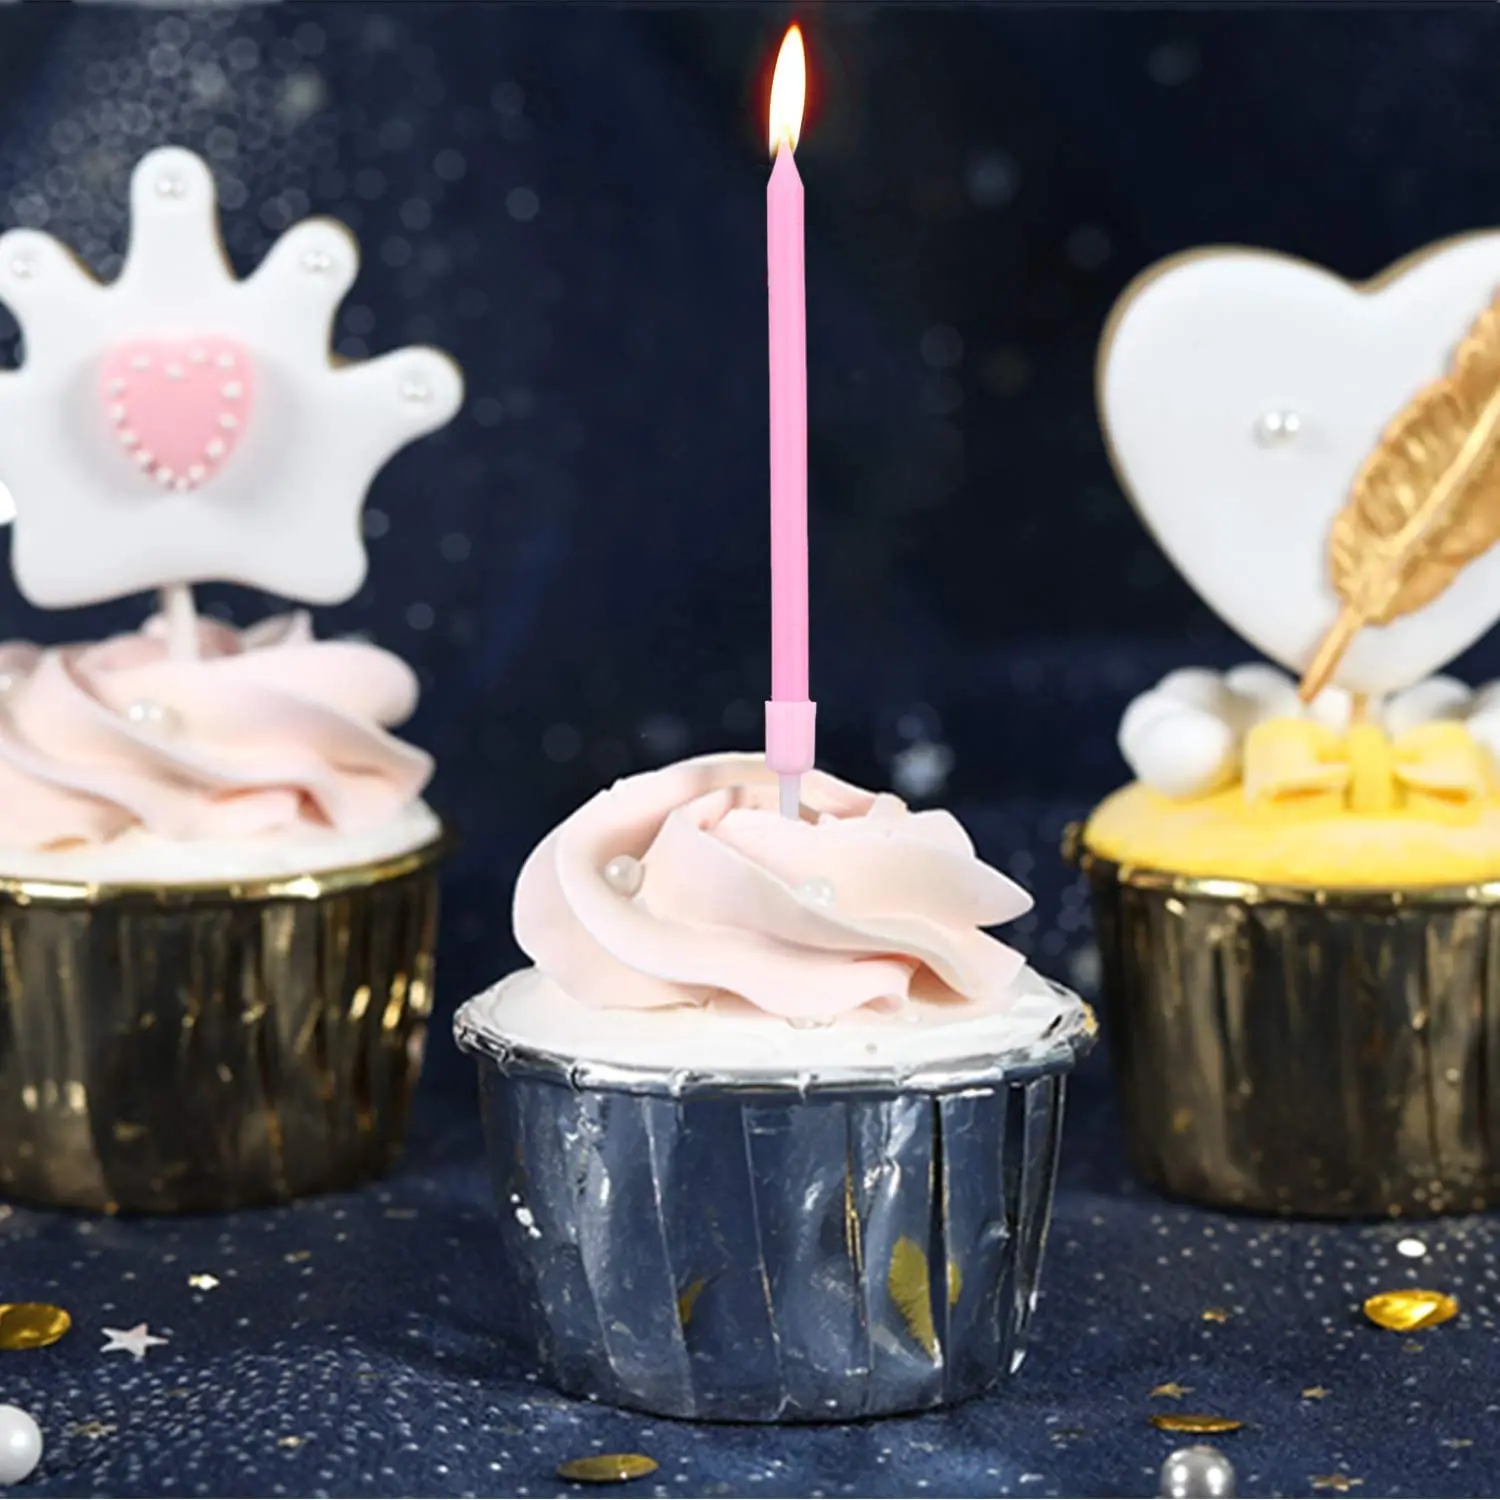 

Spiral Cake Candle in Holders Metallic Gold Pink Cake Cupcake Candles Short Thin Spiral Birthday Cake Candles for Wedding